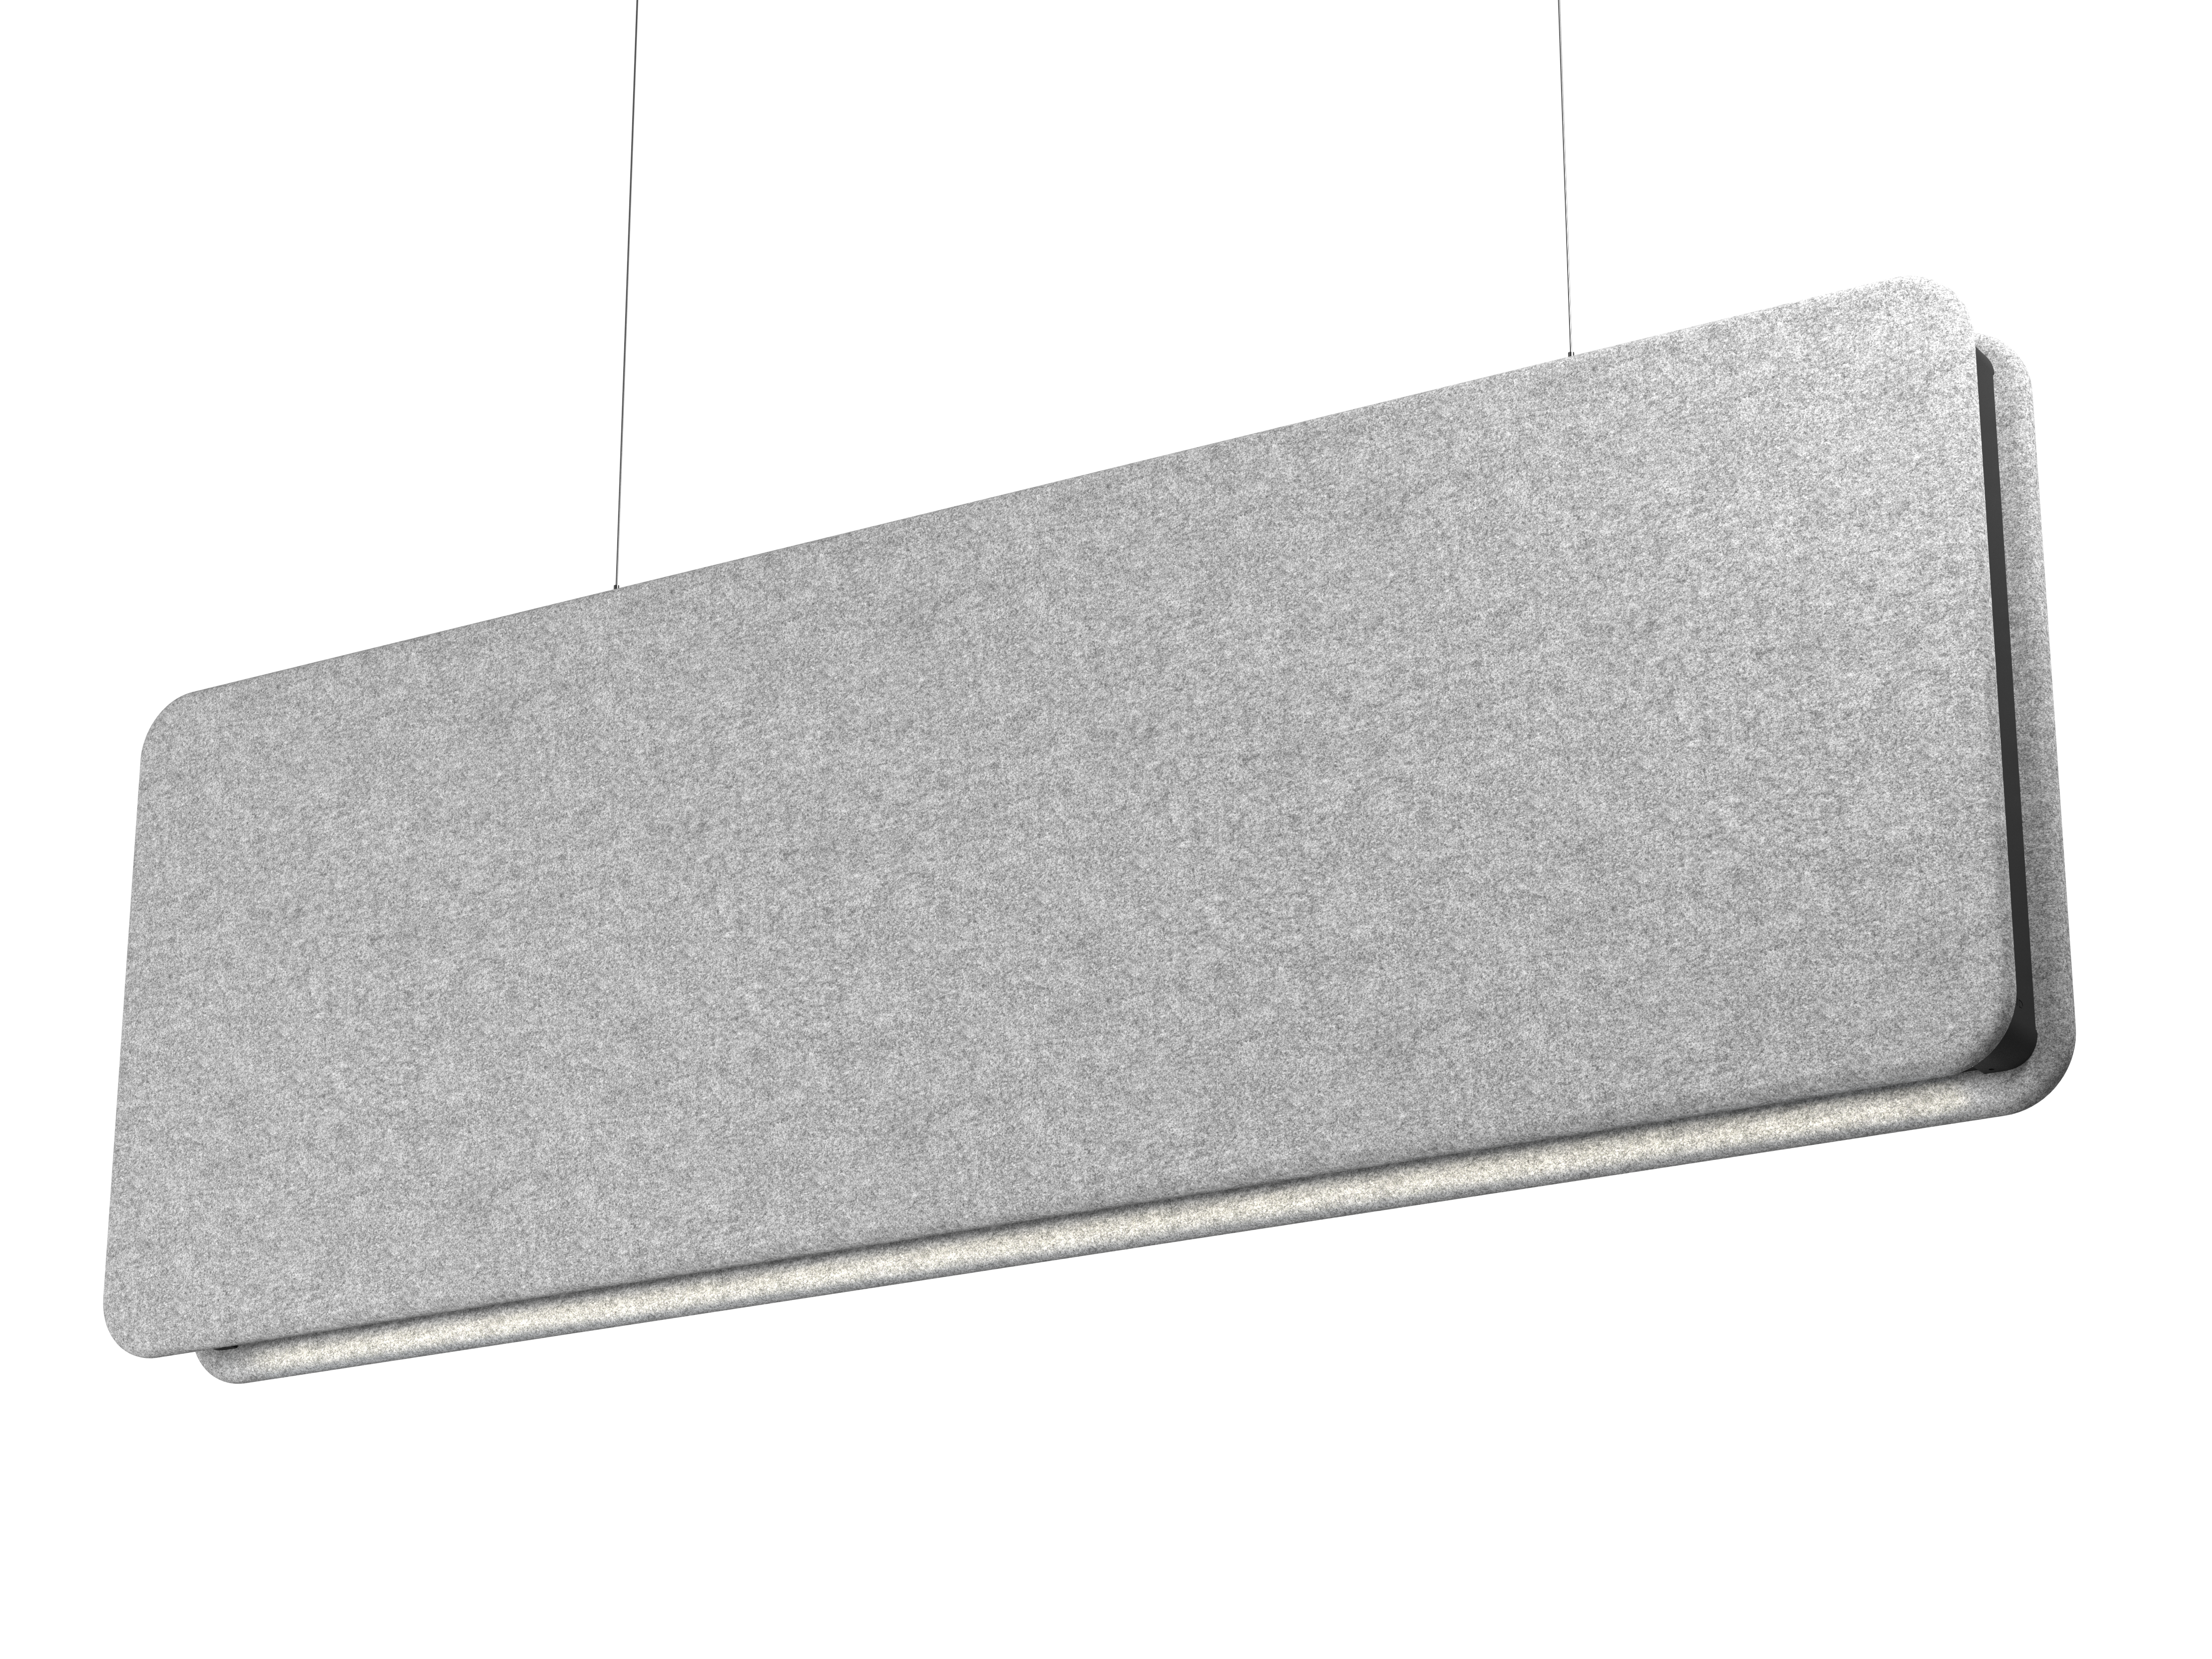 Sound absorbing lamp in grey wool